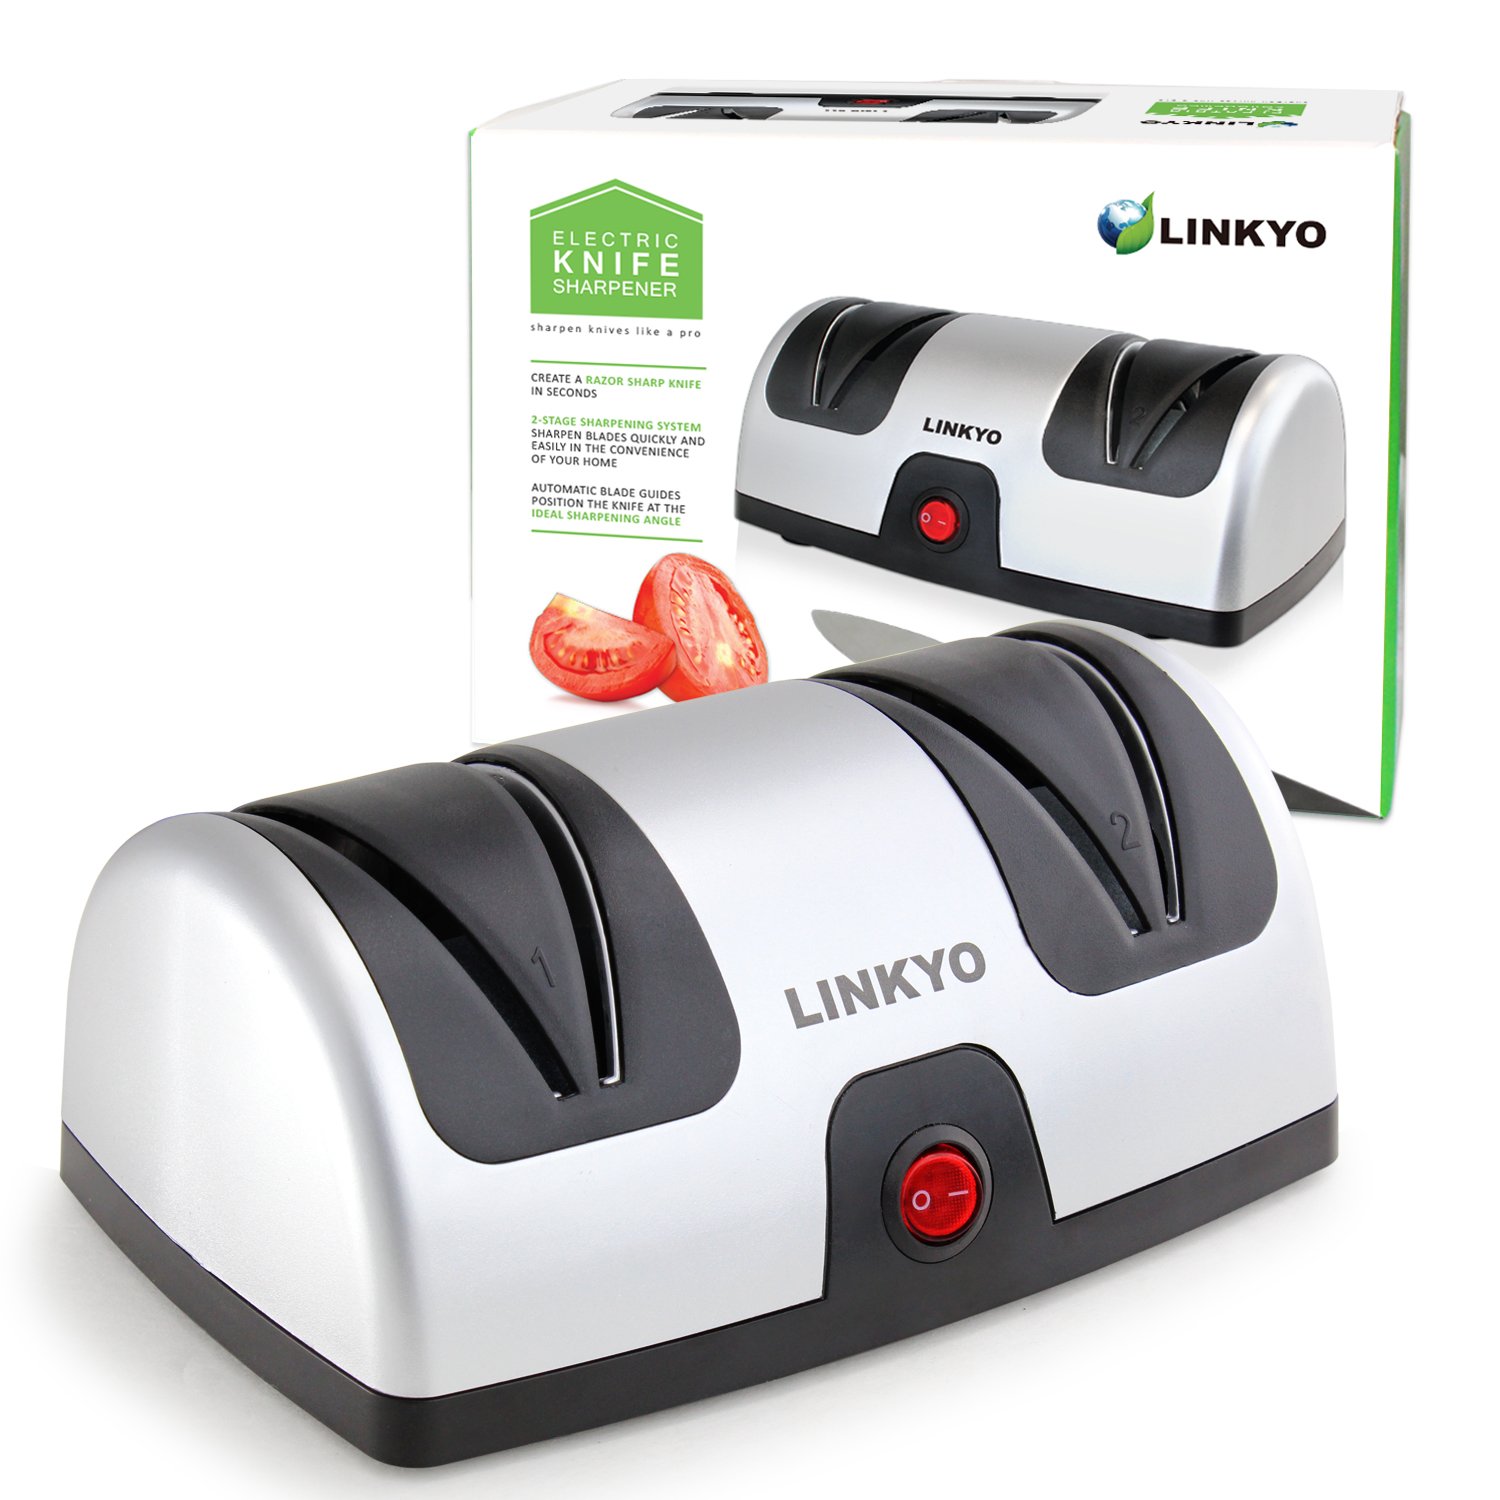 71CTkO99TNL. SL1500  - Best Electric Knife Sharpeners for Your Kitchen in 2019